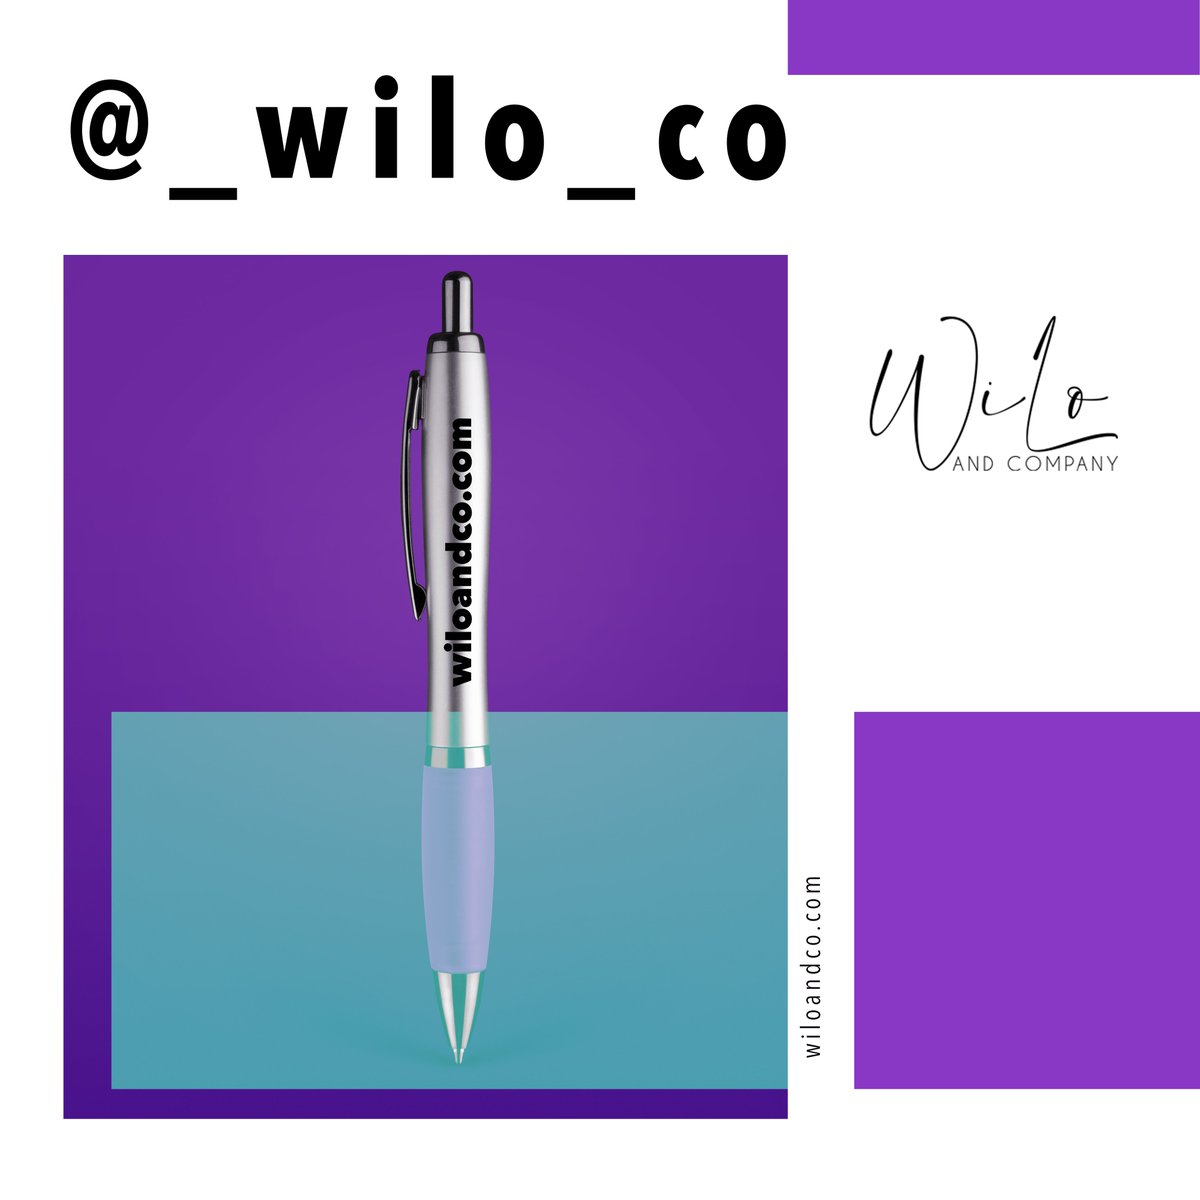 They say “out of sight, out of mind” so stay in-sight and on-the-mind with customized pens for your business. Go the extra mile for your storefront or as part of your passive marketing plan! #WiLoandCo #LetsCreate #printing #pens #customized #branding #marketing